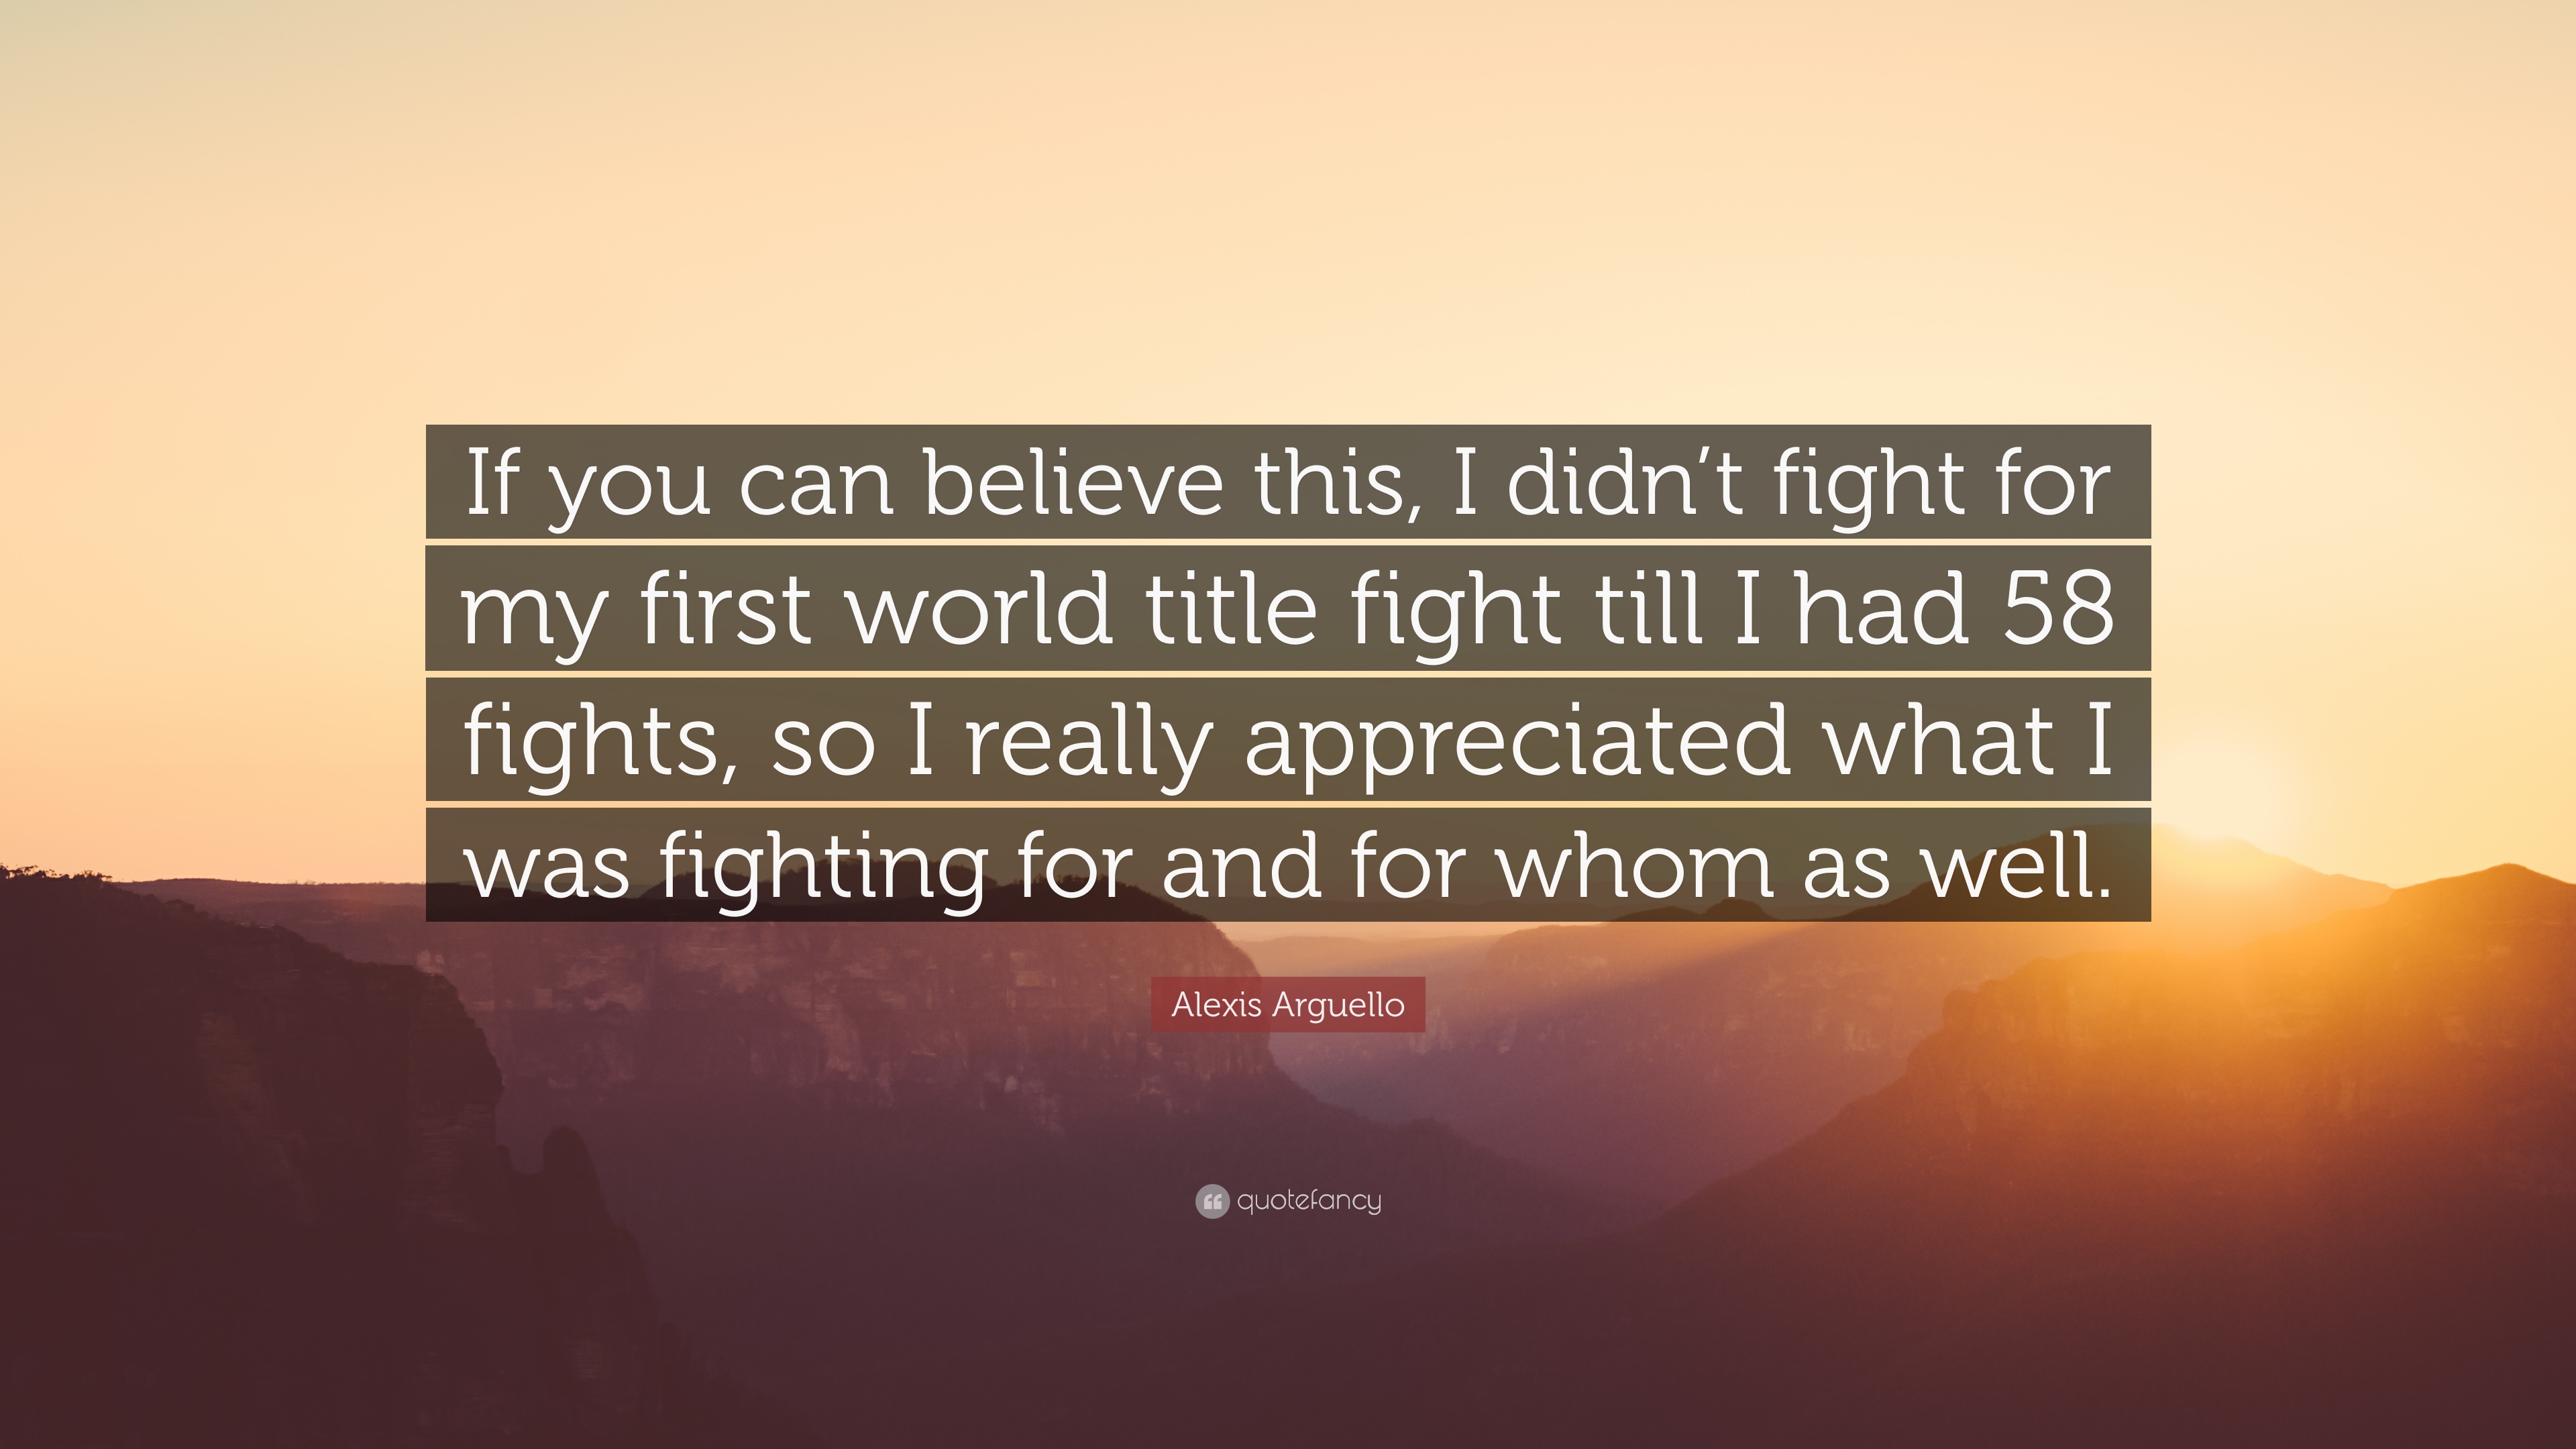 Alexis Arguello Quote: “If you can believe this, I didn't fight for ...